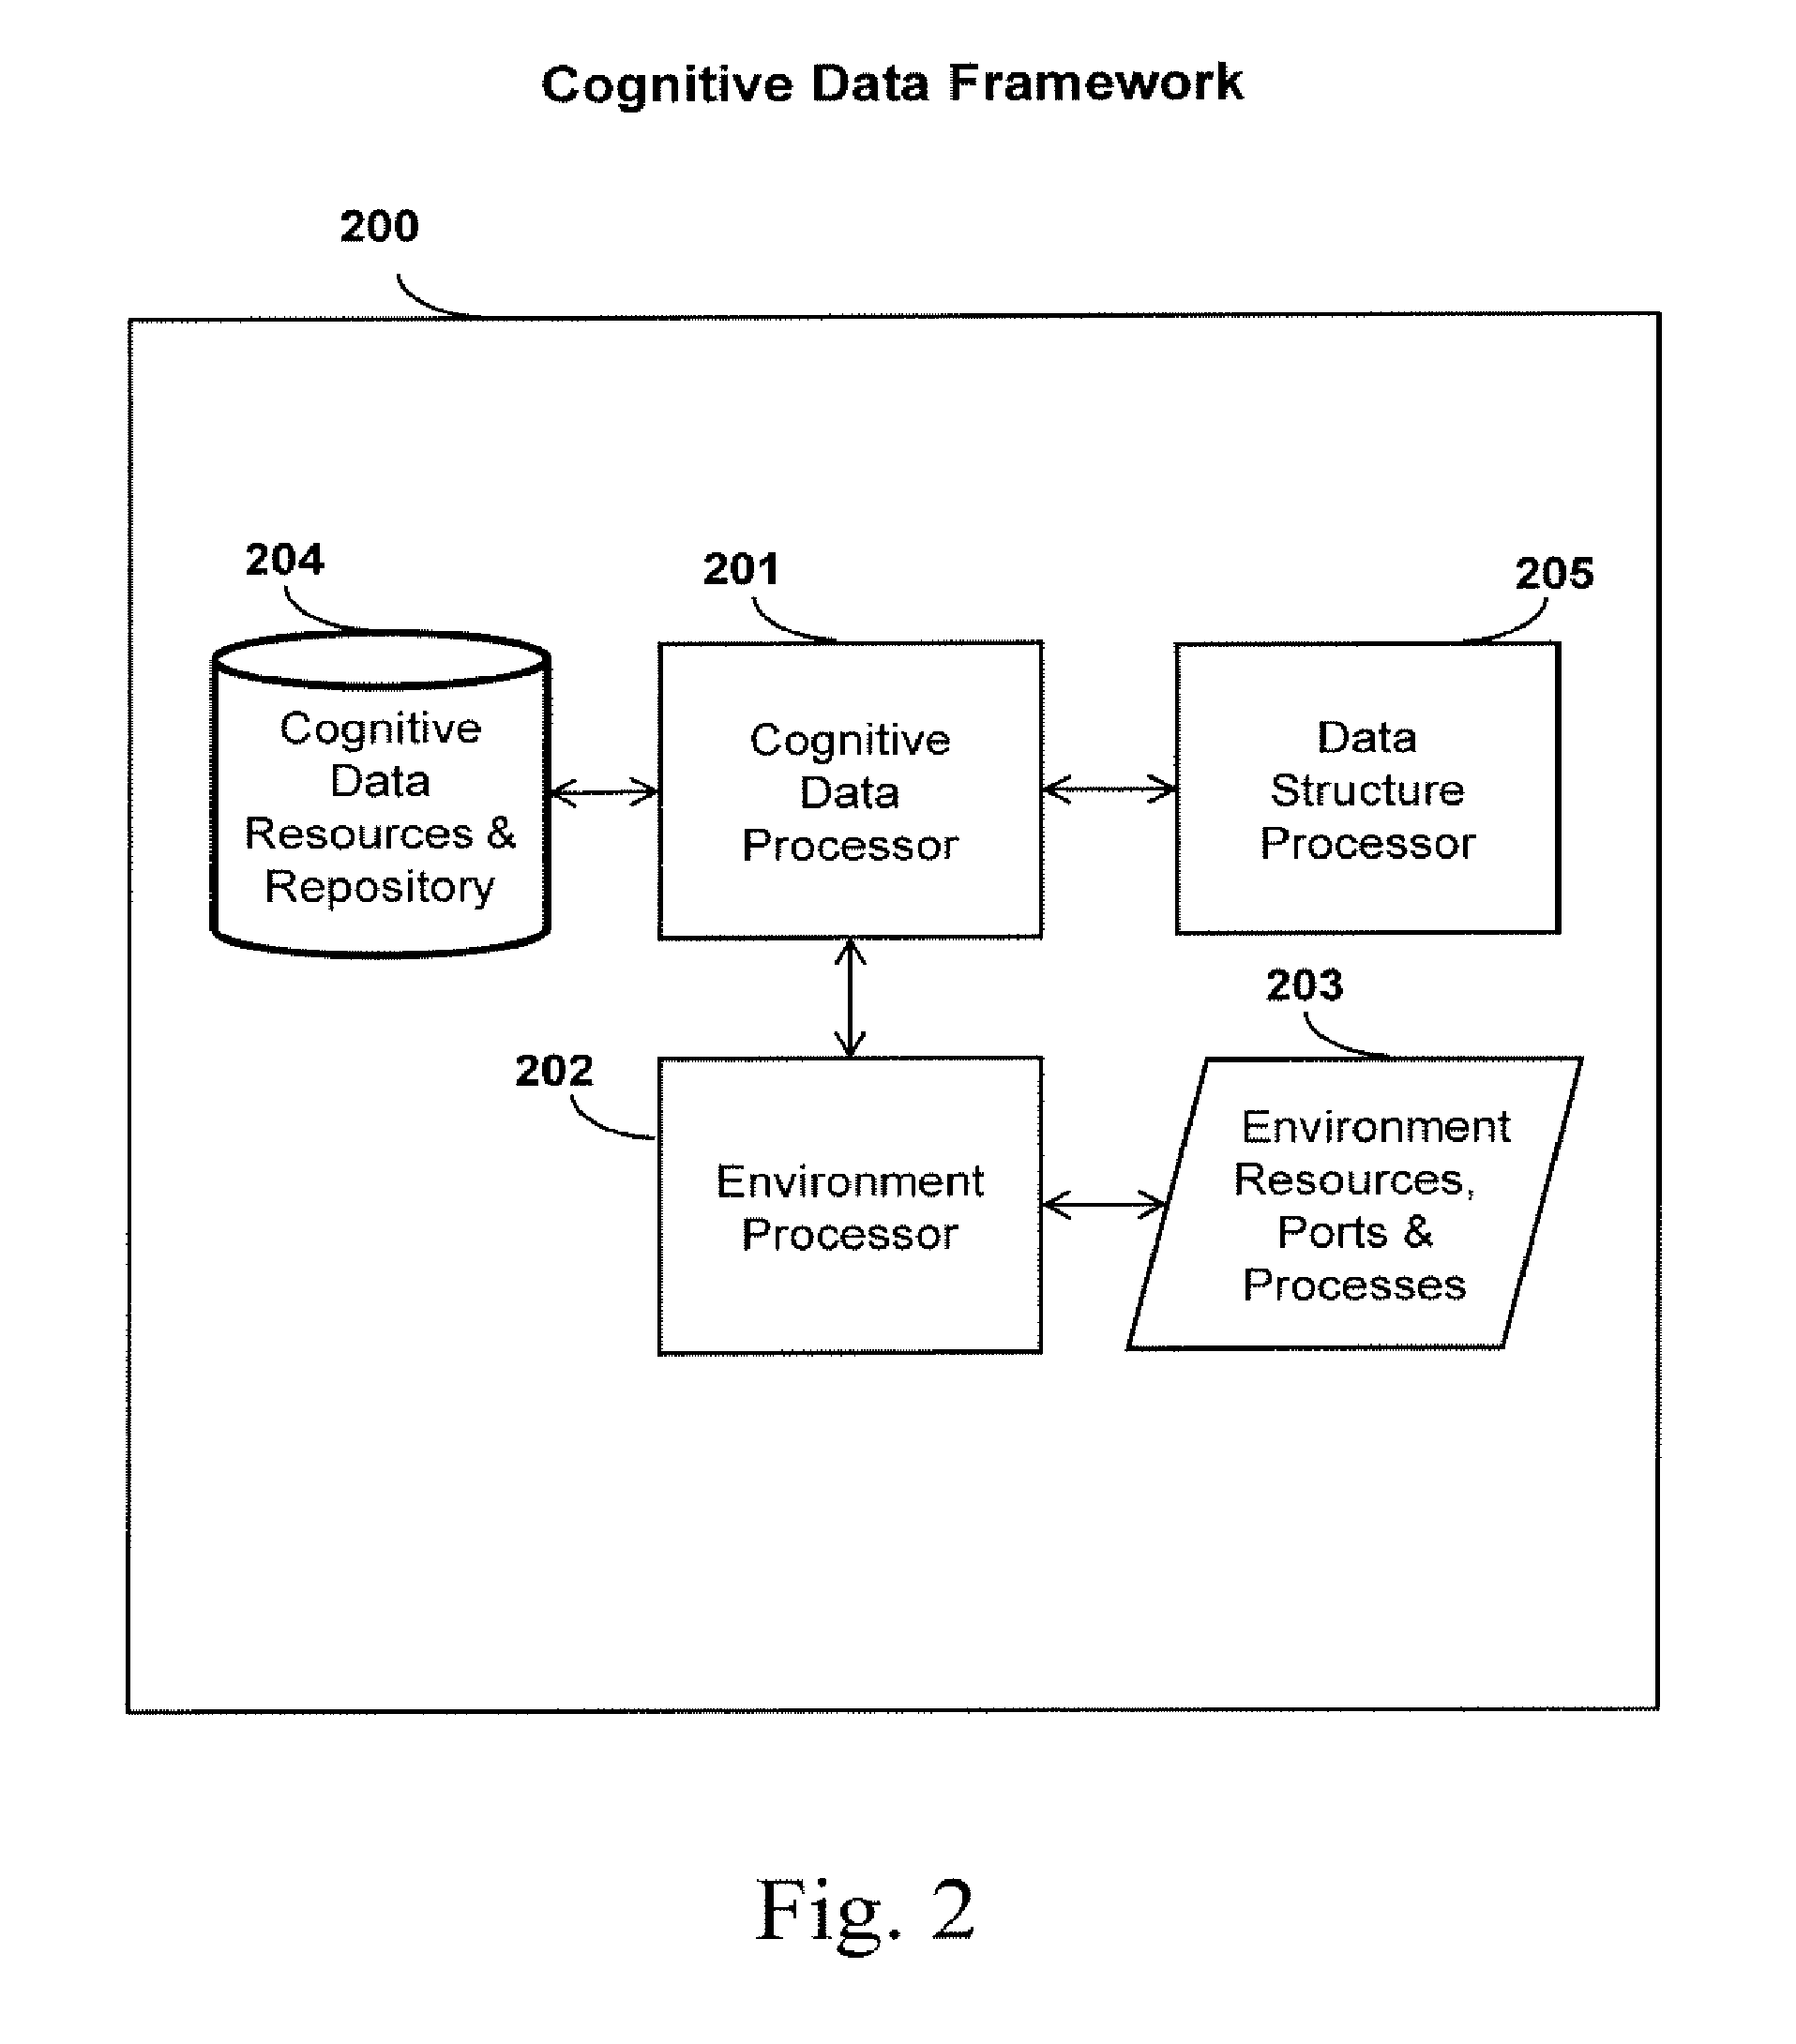 System and Method of Data Cognition Incorporating Autonomous Security Protection